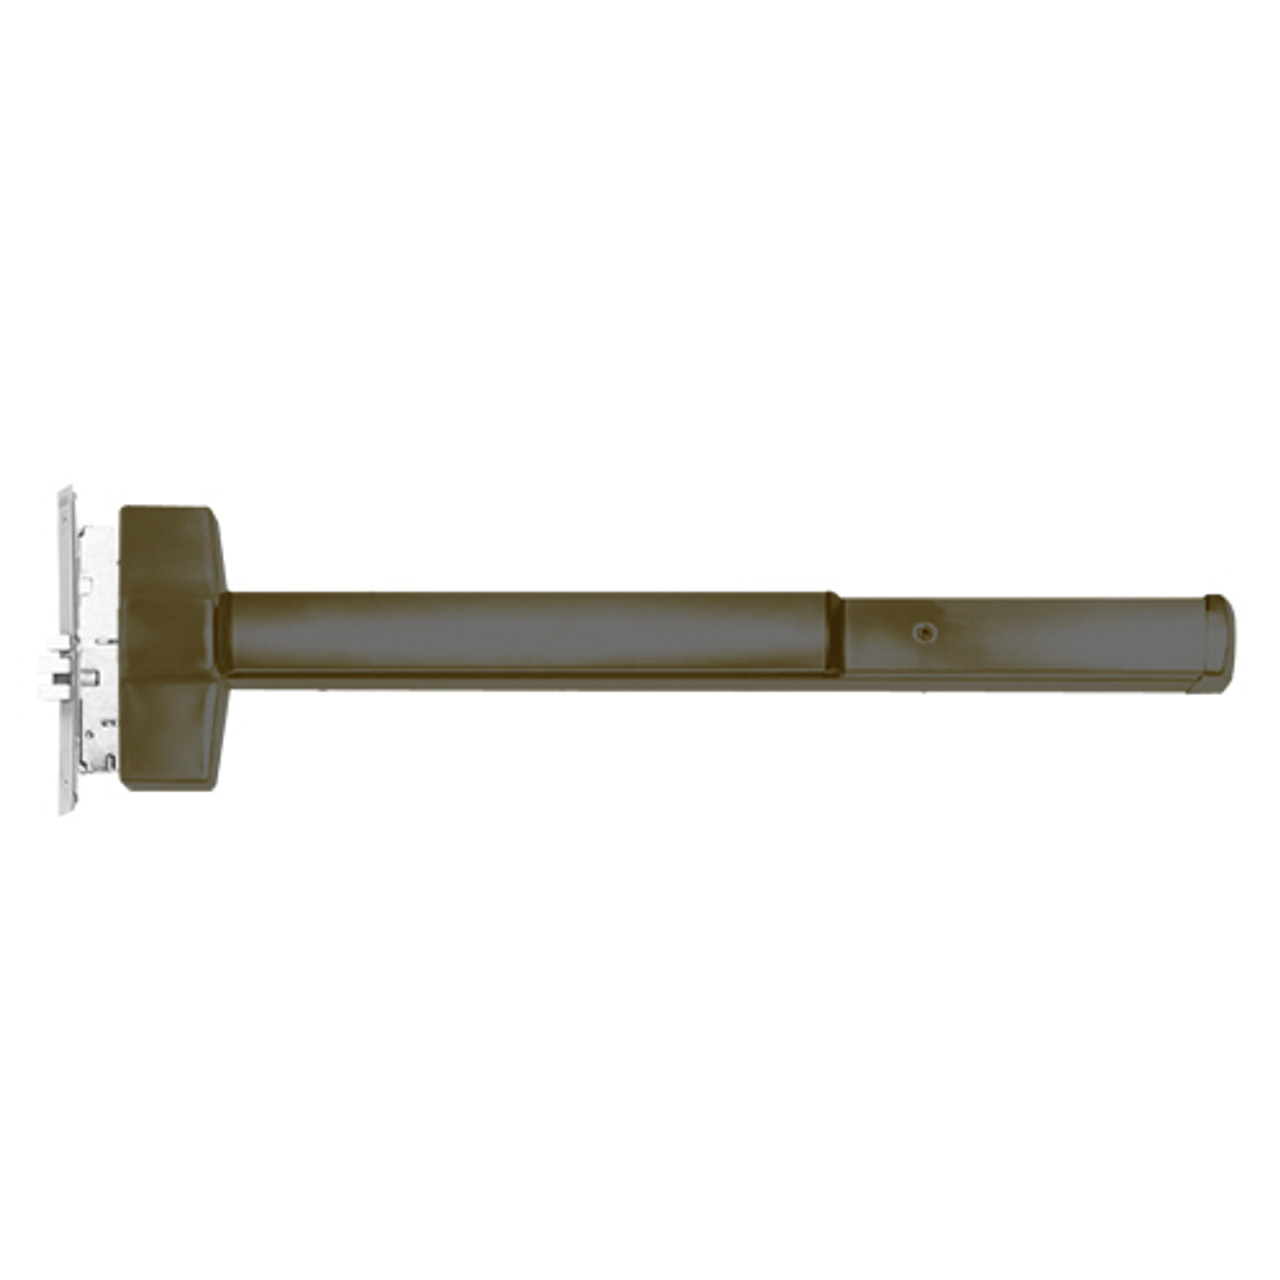 ED5600LD-613-W048-LHR Corbin ED5600 Series Non Fire Rated Mortise Exit Device with Delayed Egress in Oil Rubbed Bronze Finish